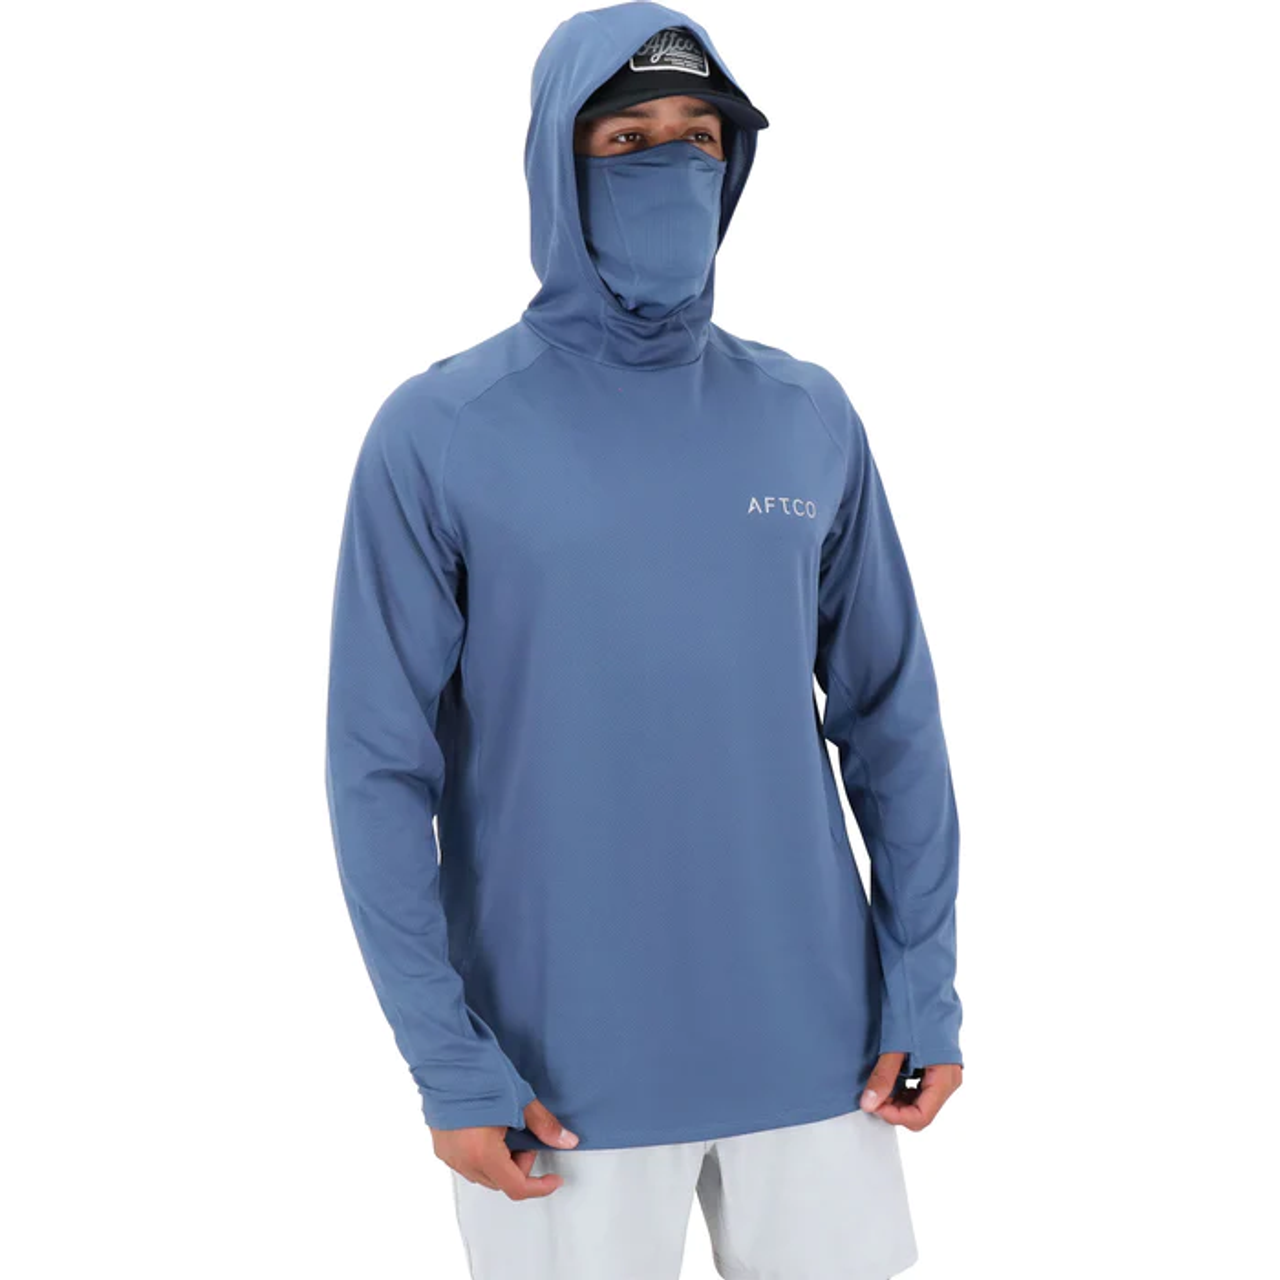 Aftco Adapt Phase Change Performance Hoodie